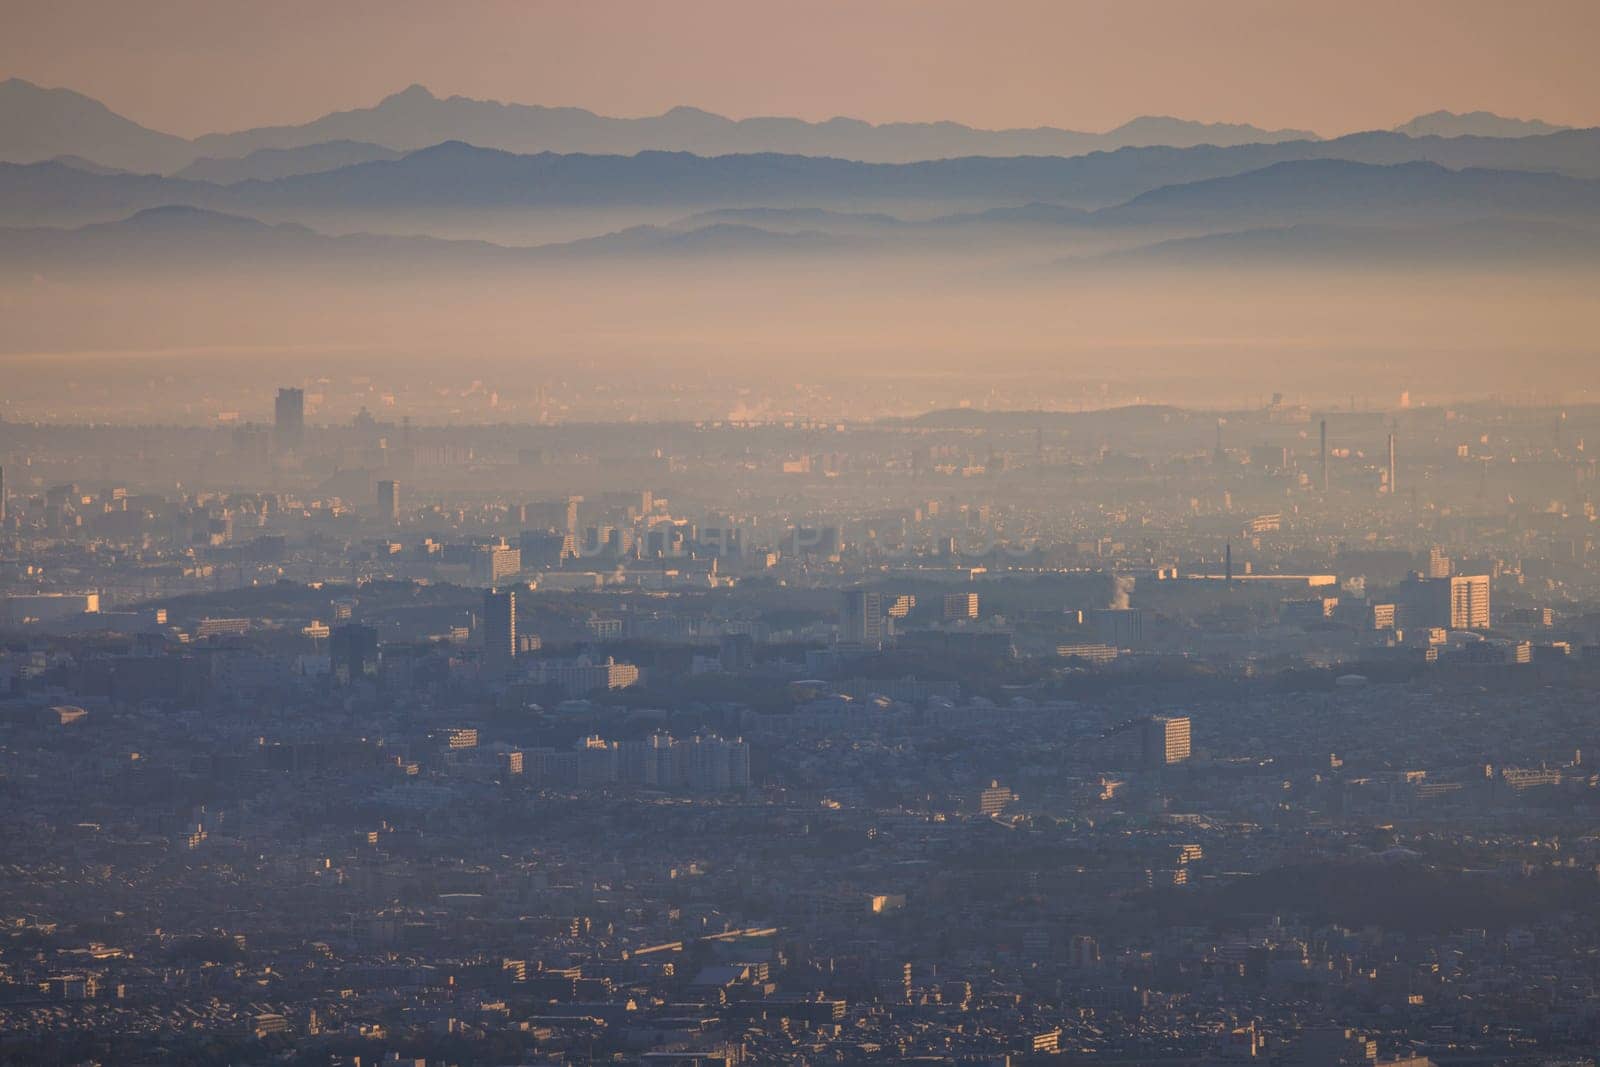 Sprawling city blends with smog layer and distant mountains at sunrise by Osaze